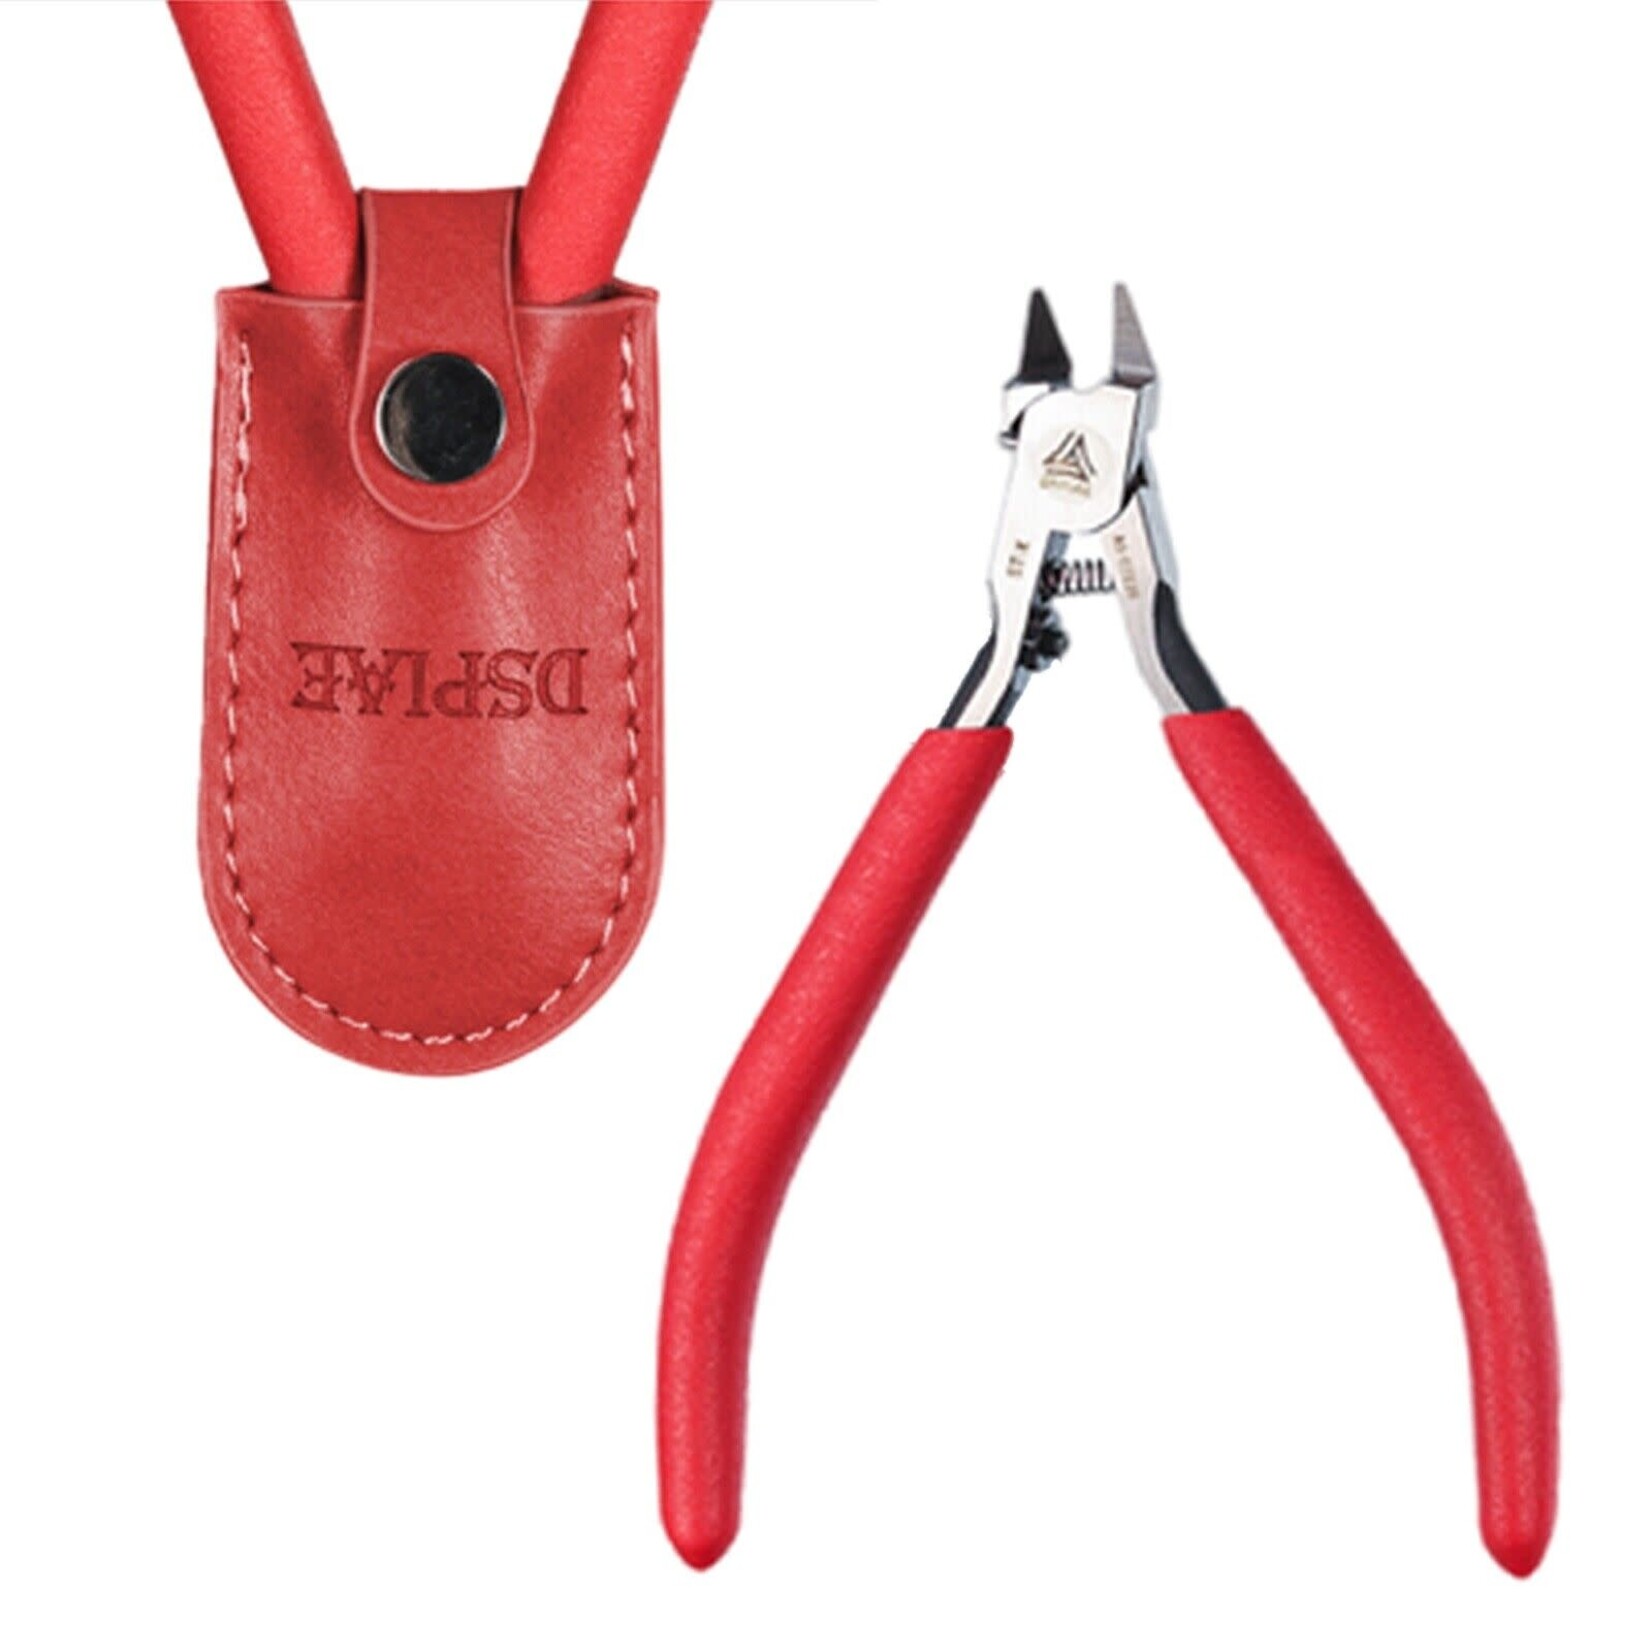 DSPIAE DS-ST-X DSPIAE ST-X UItra Fine Single Blade Nipper for Plastic Models